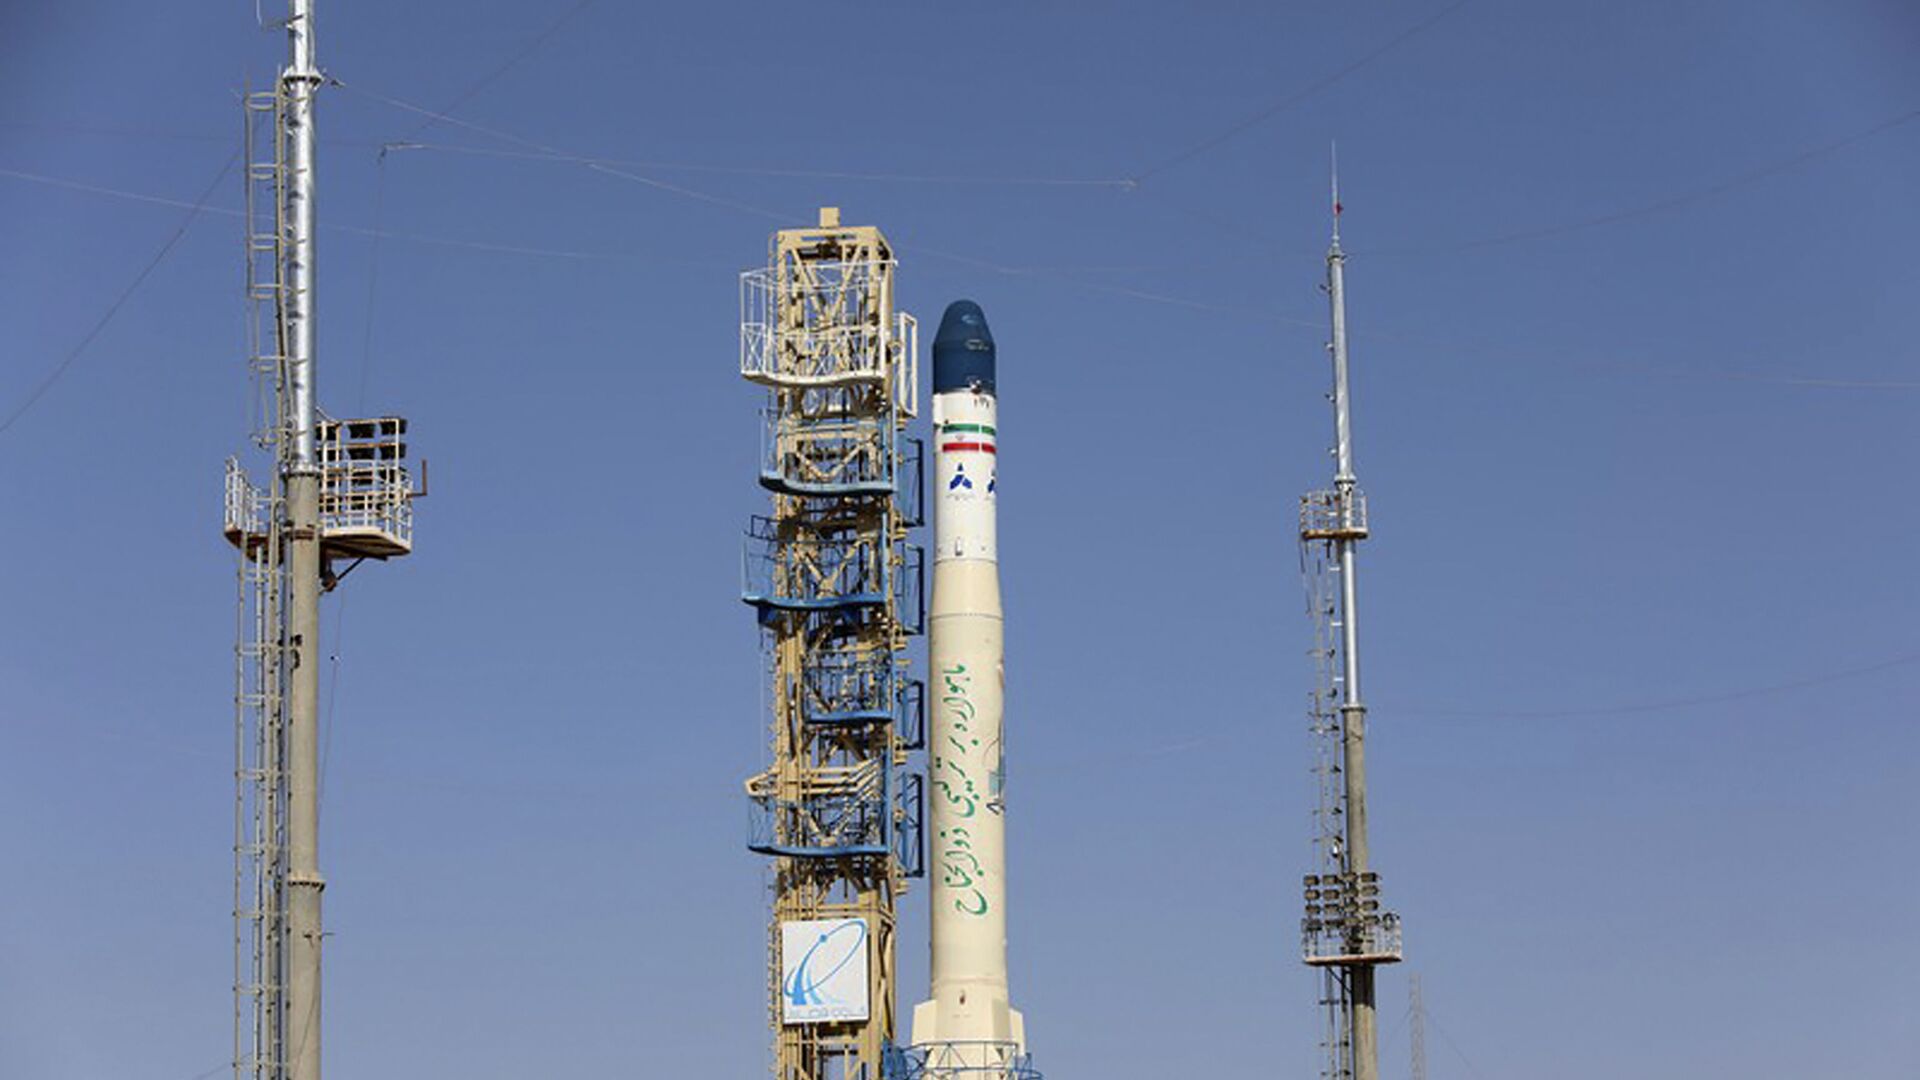 This picture released by the official website of the Iranian Defense Ministry on Monday, Feb. 1, 2021, shows Iran's newest satellite-carrier rocket, called Zuljanah, before being launched at an undisclosed location, Iran. Iranian state TV on Monday aired the launch of the country's newest satellite-carrying rocket, called Zuljanah, which it said was able to reach a height of 500 km (310 miles) and is capable of carrying a 200-kilogram (440-pound) satellite. It did not launch a satellite into orbit. (Iranian Defense Ministry via AP) - Sputnik International, 1920, 16.05.2022